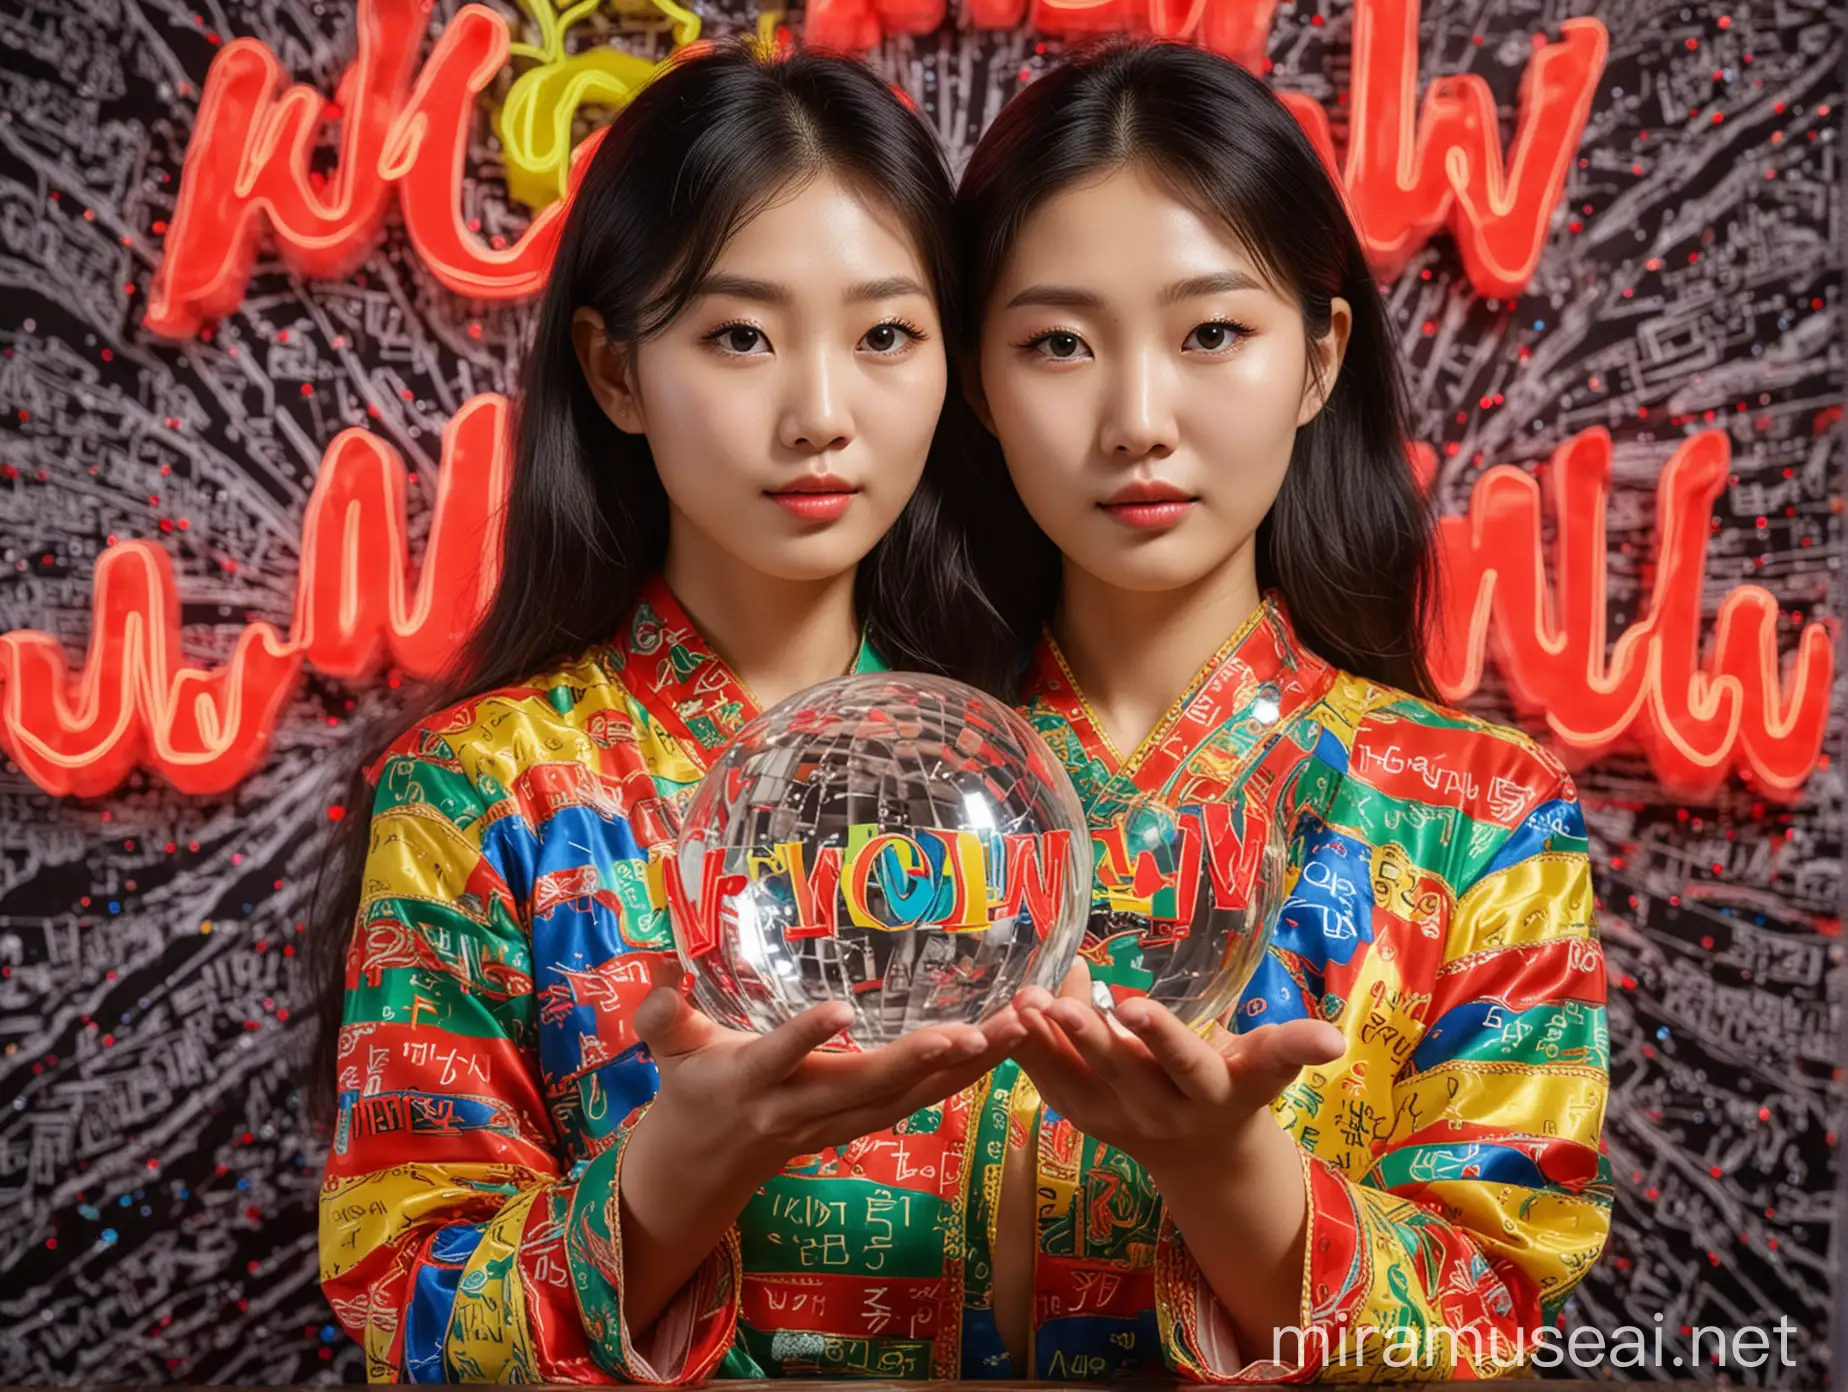 Korean Woman Holding Neon Crystal Ball with Swirl Pattern Background